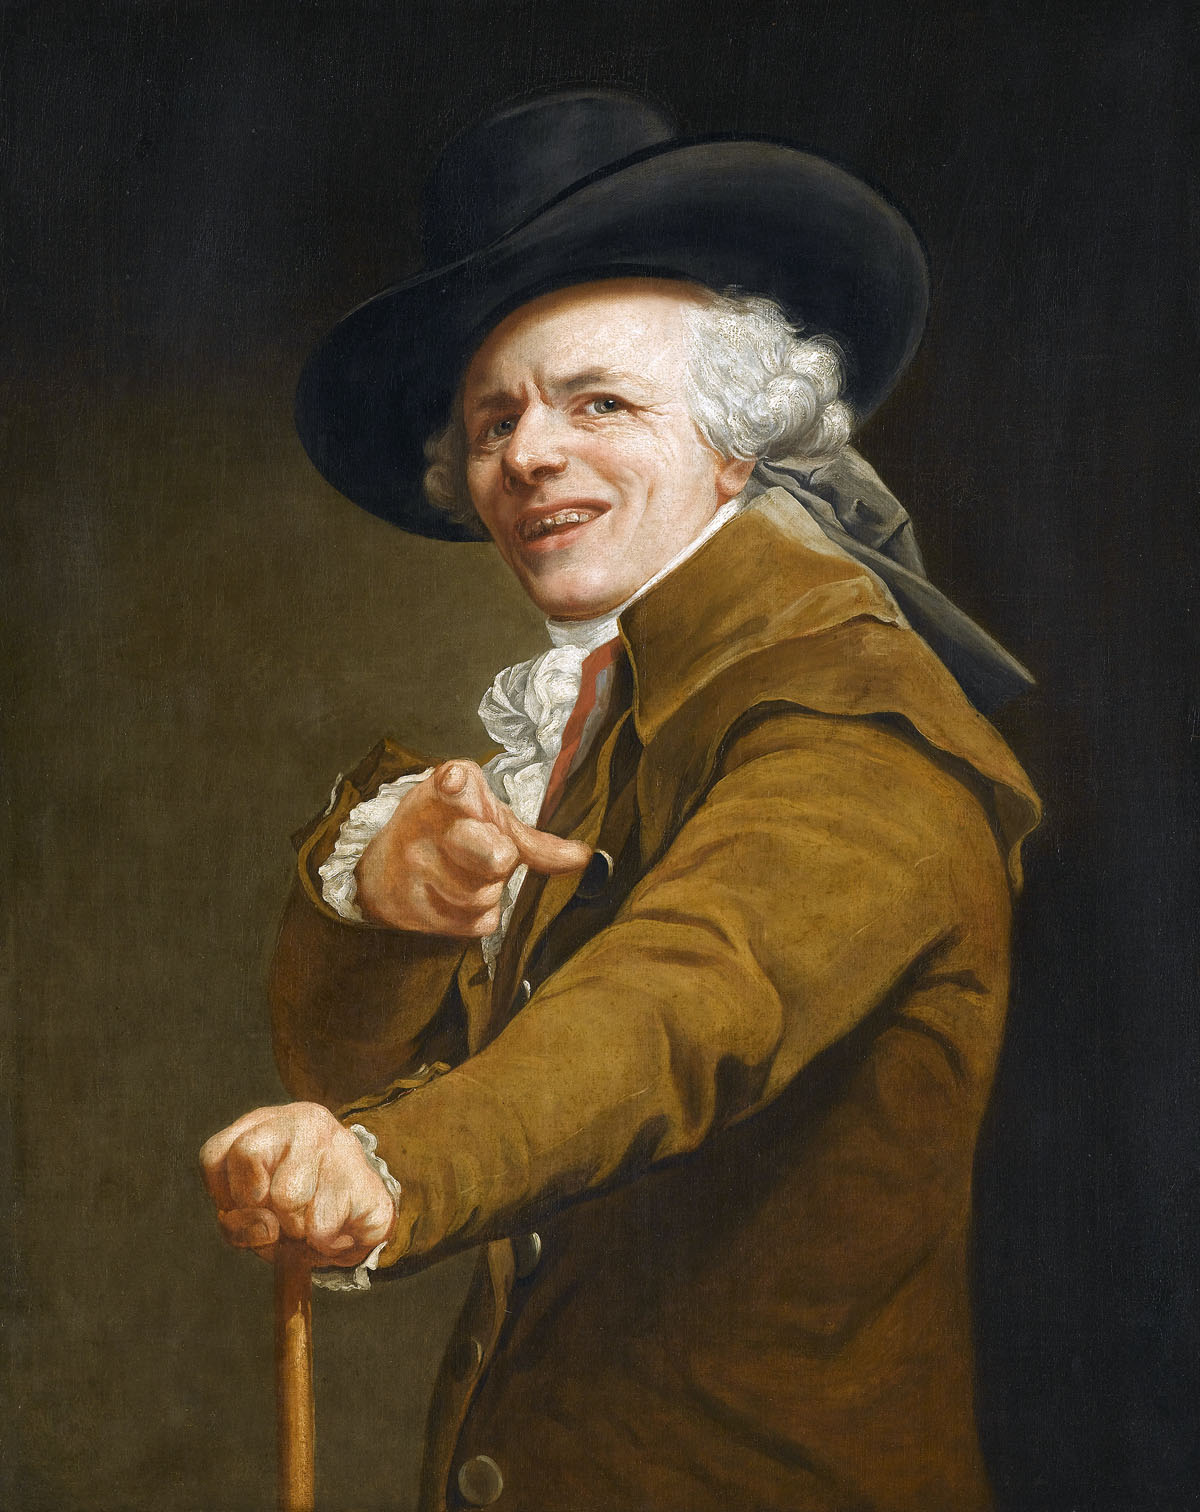 Portrait of the Artist with the Features of a Mocker, by Joseph Ducreux